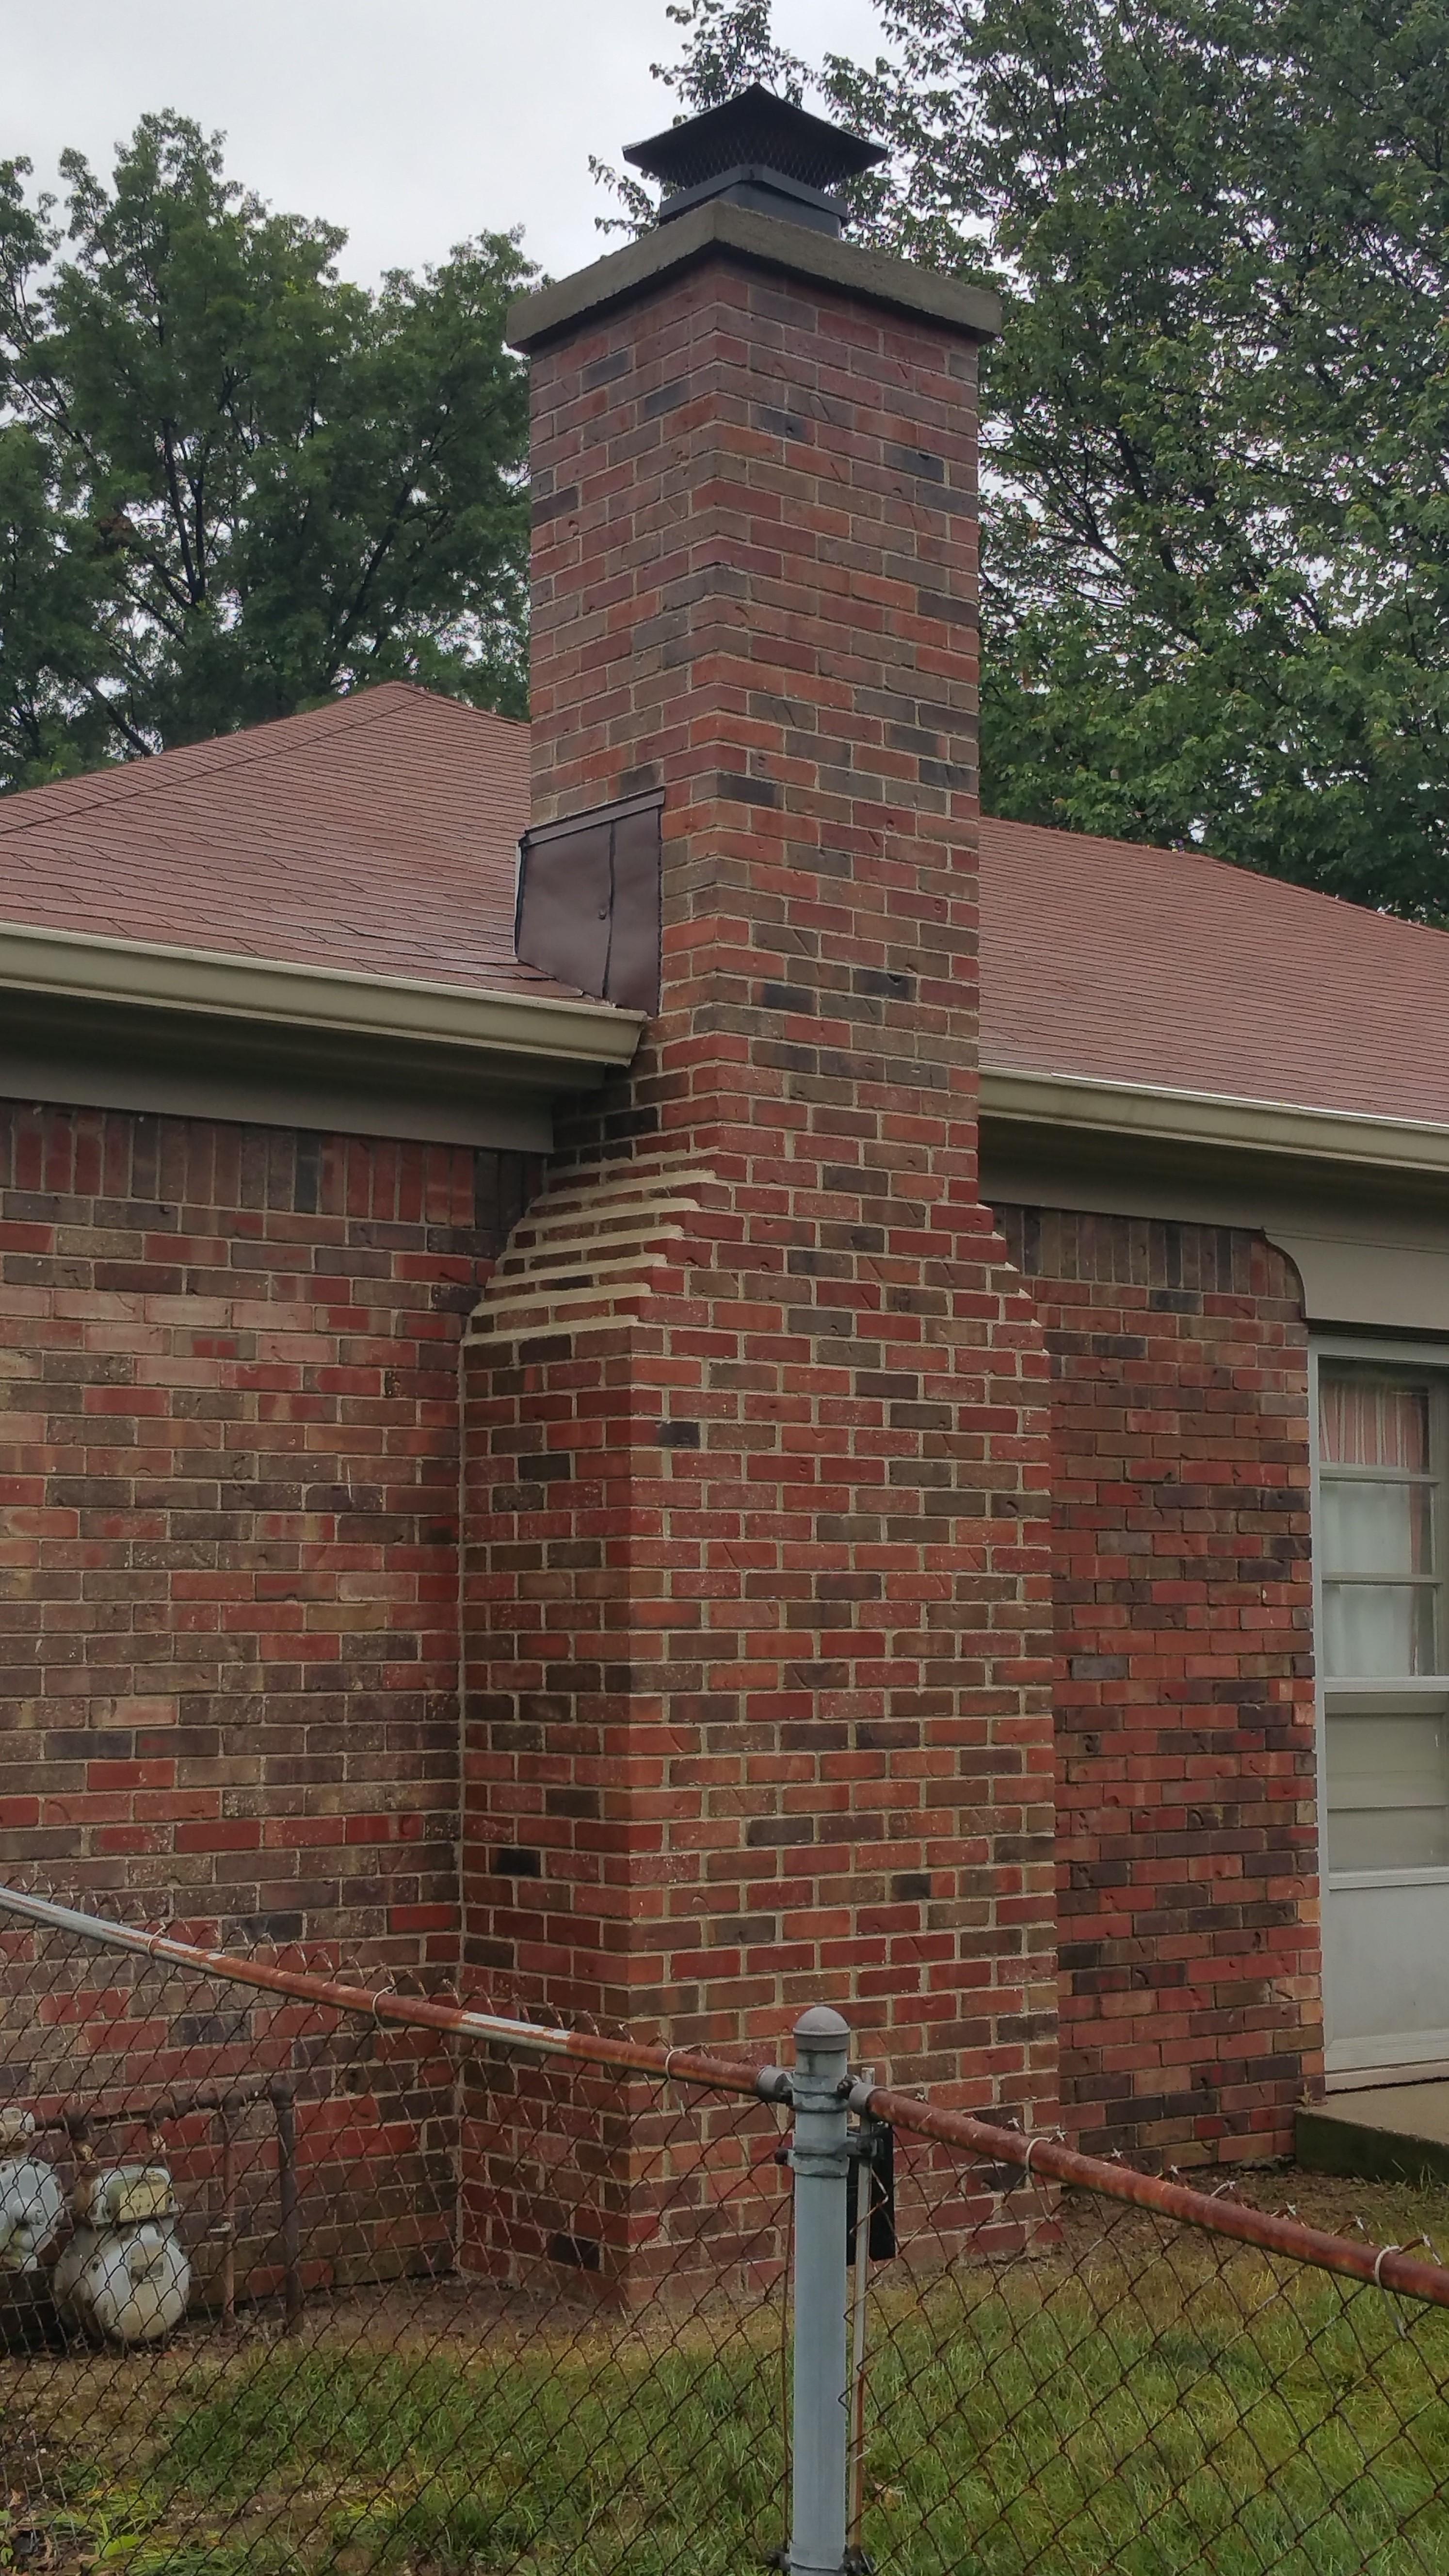 This chimney had so much damage it was not able to be saved. We took down the old chimney and hauled it away. This is a picture of the one we put in it's place. almost perfect brick and mortar match. THe home is 40 years old.